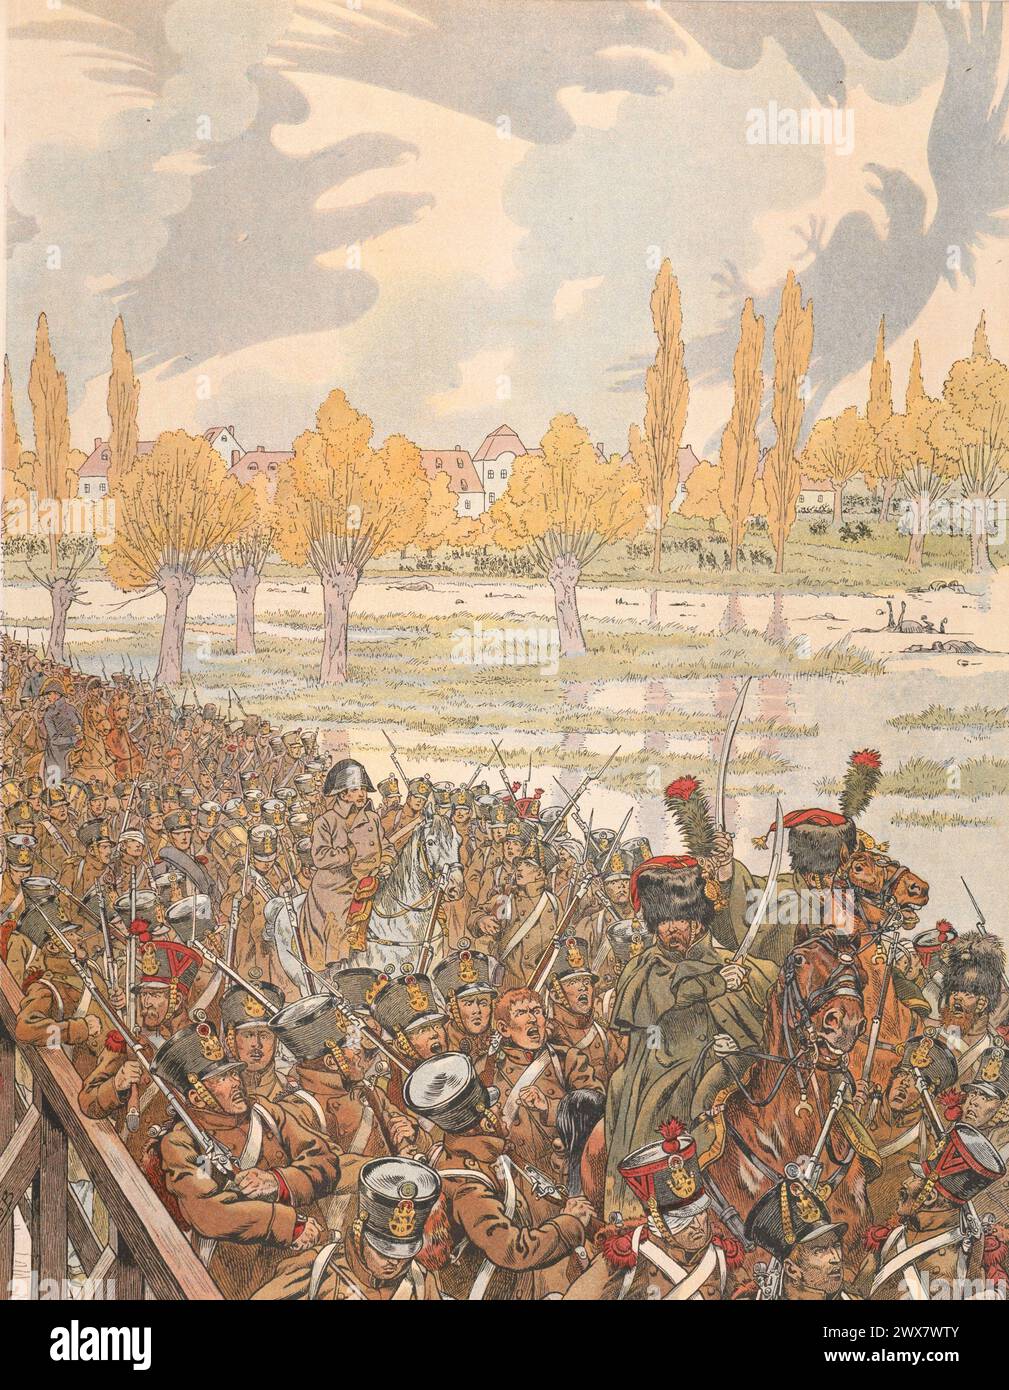 Battle of Leipzig: Napoleon I decided to retreat his army and a flood of soldiers crossed the only possible route: the Elster bridge, on 19 October 1813.  Illustration by Job from the book 'Napoléon' written by Georges Montorgueil, published in 1921 by Boivin (Paris). Stock Photo